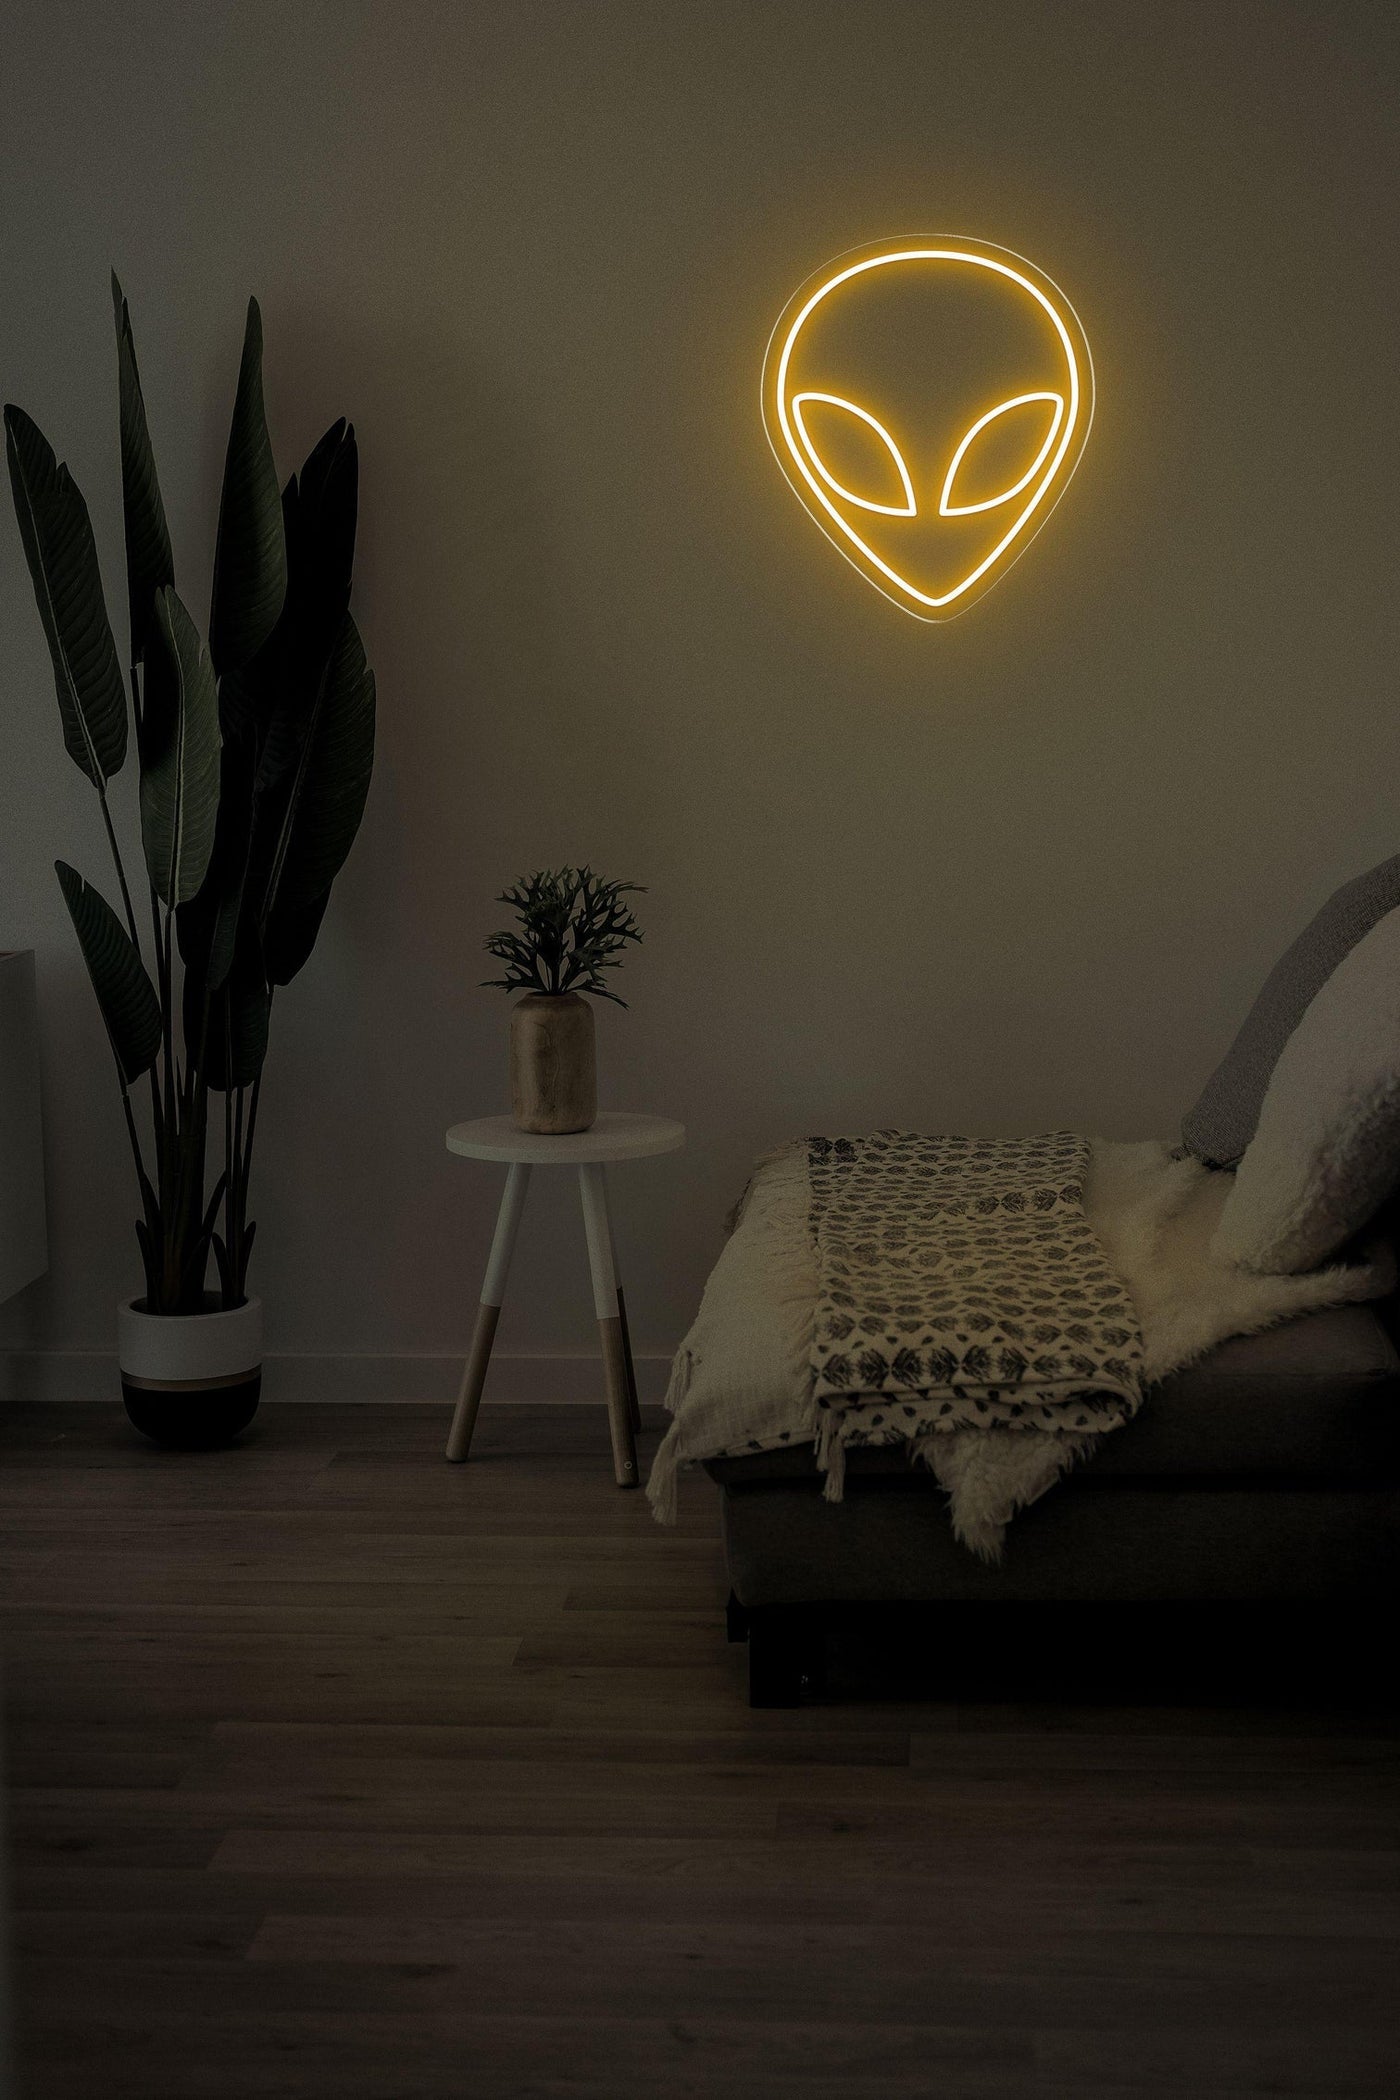 ET LED neon sign - 20inch x 23inchGold